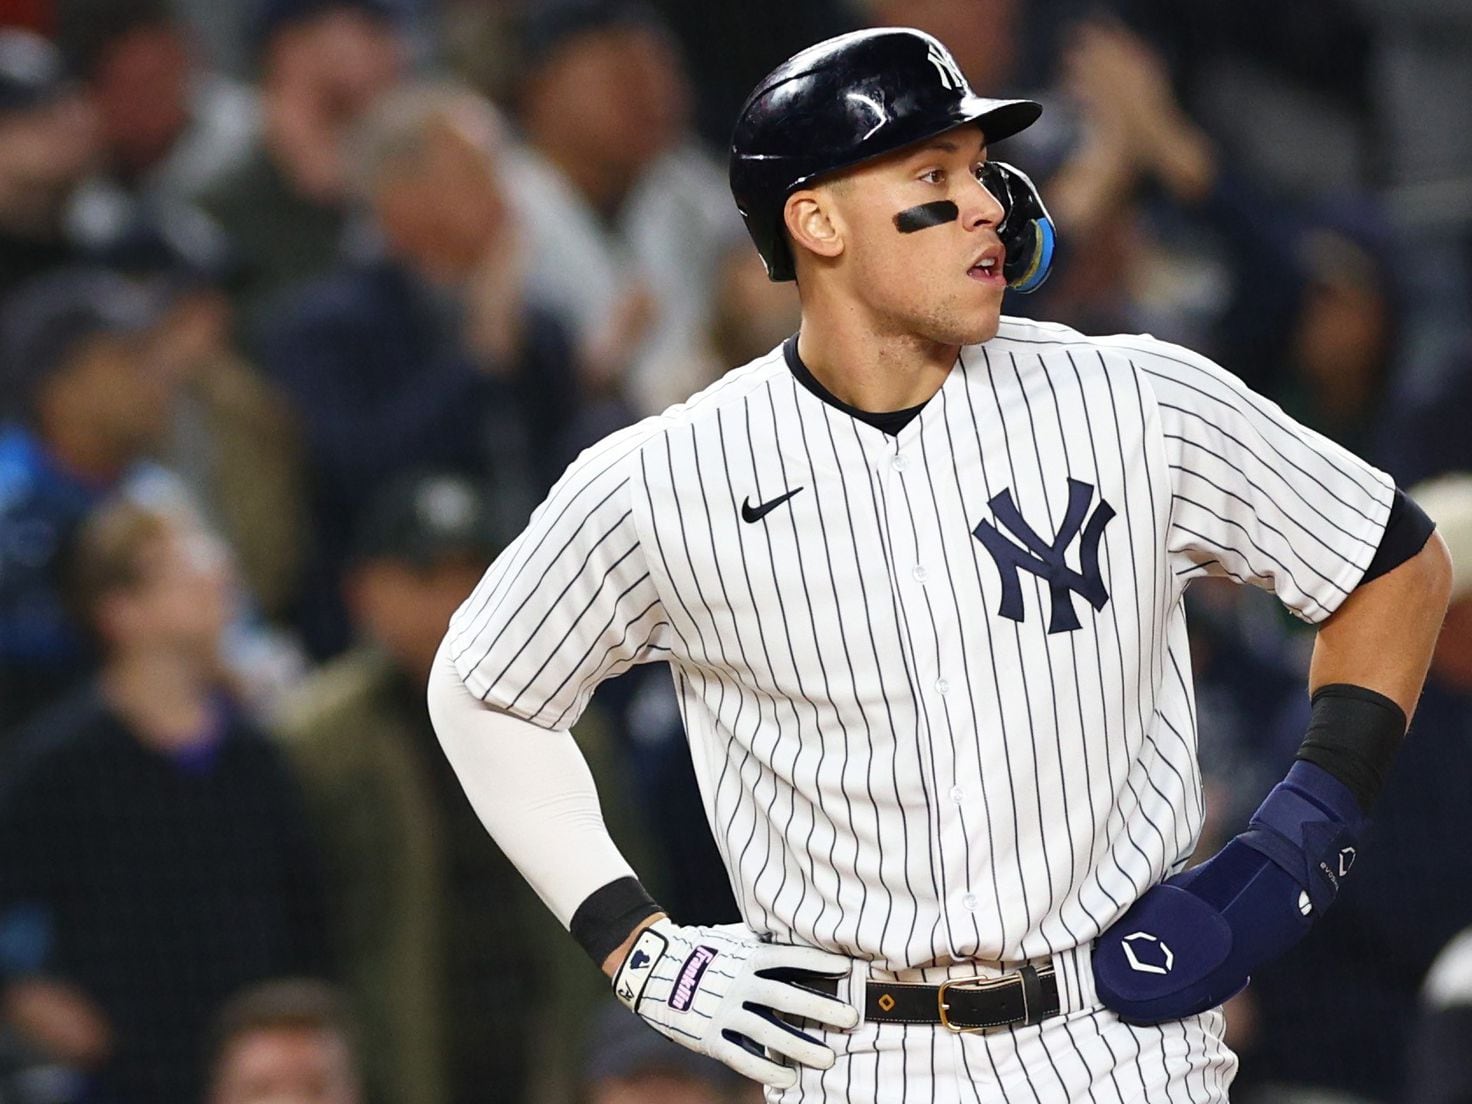 NY Yankees: Brandon Drury arrives at spring training, ready to win now